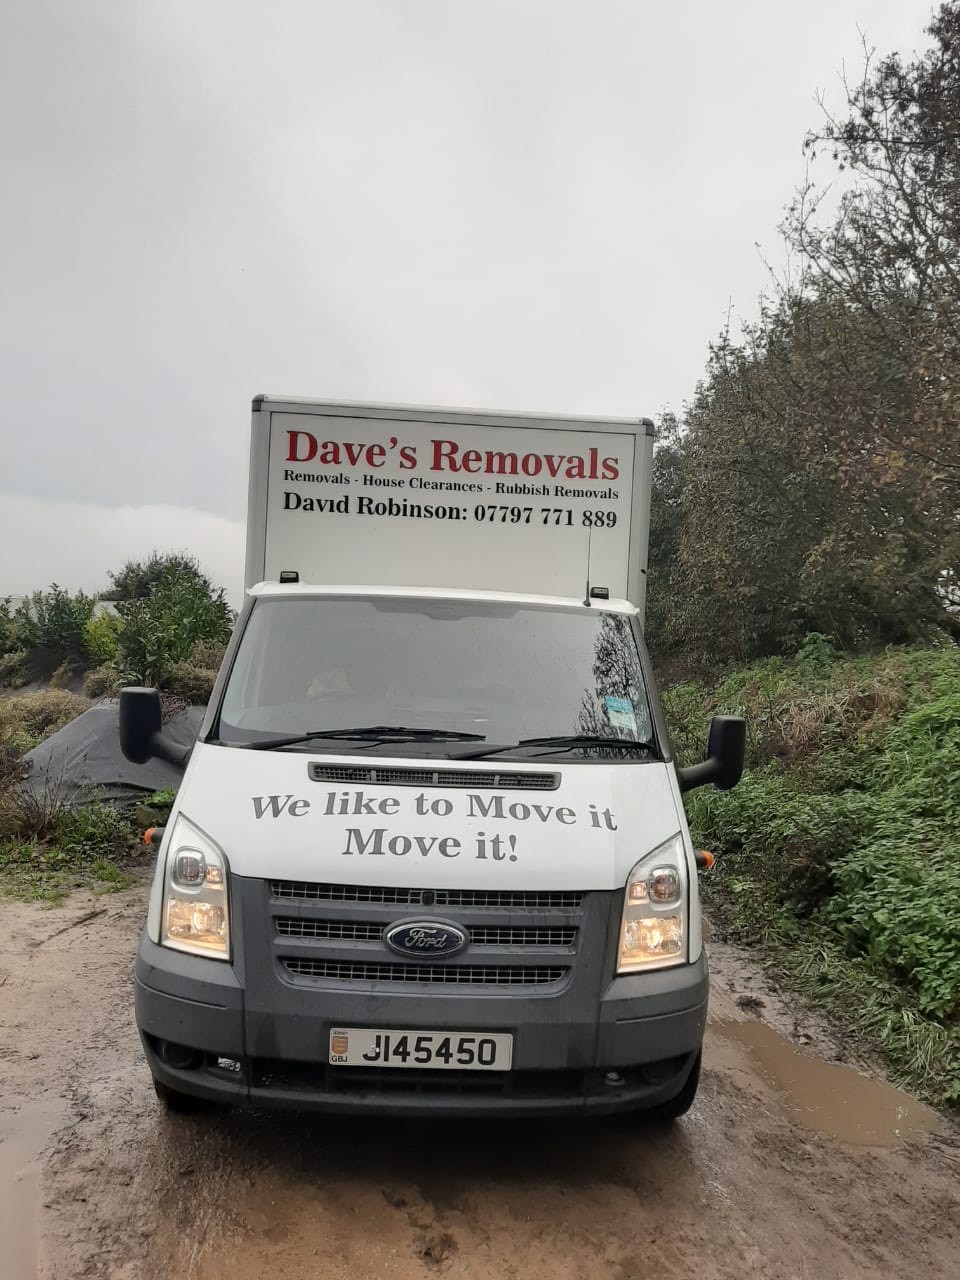 Dave's Removals